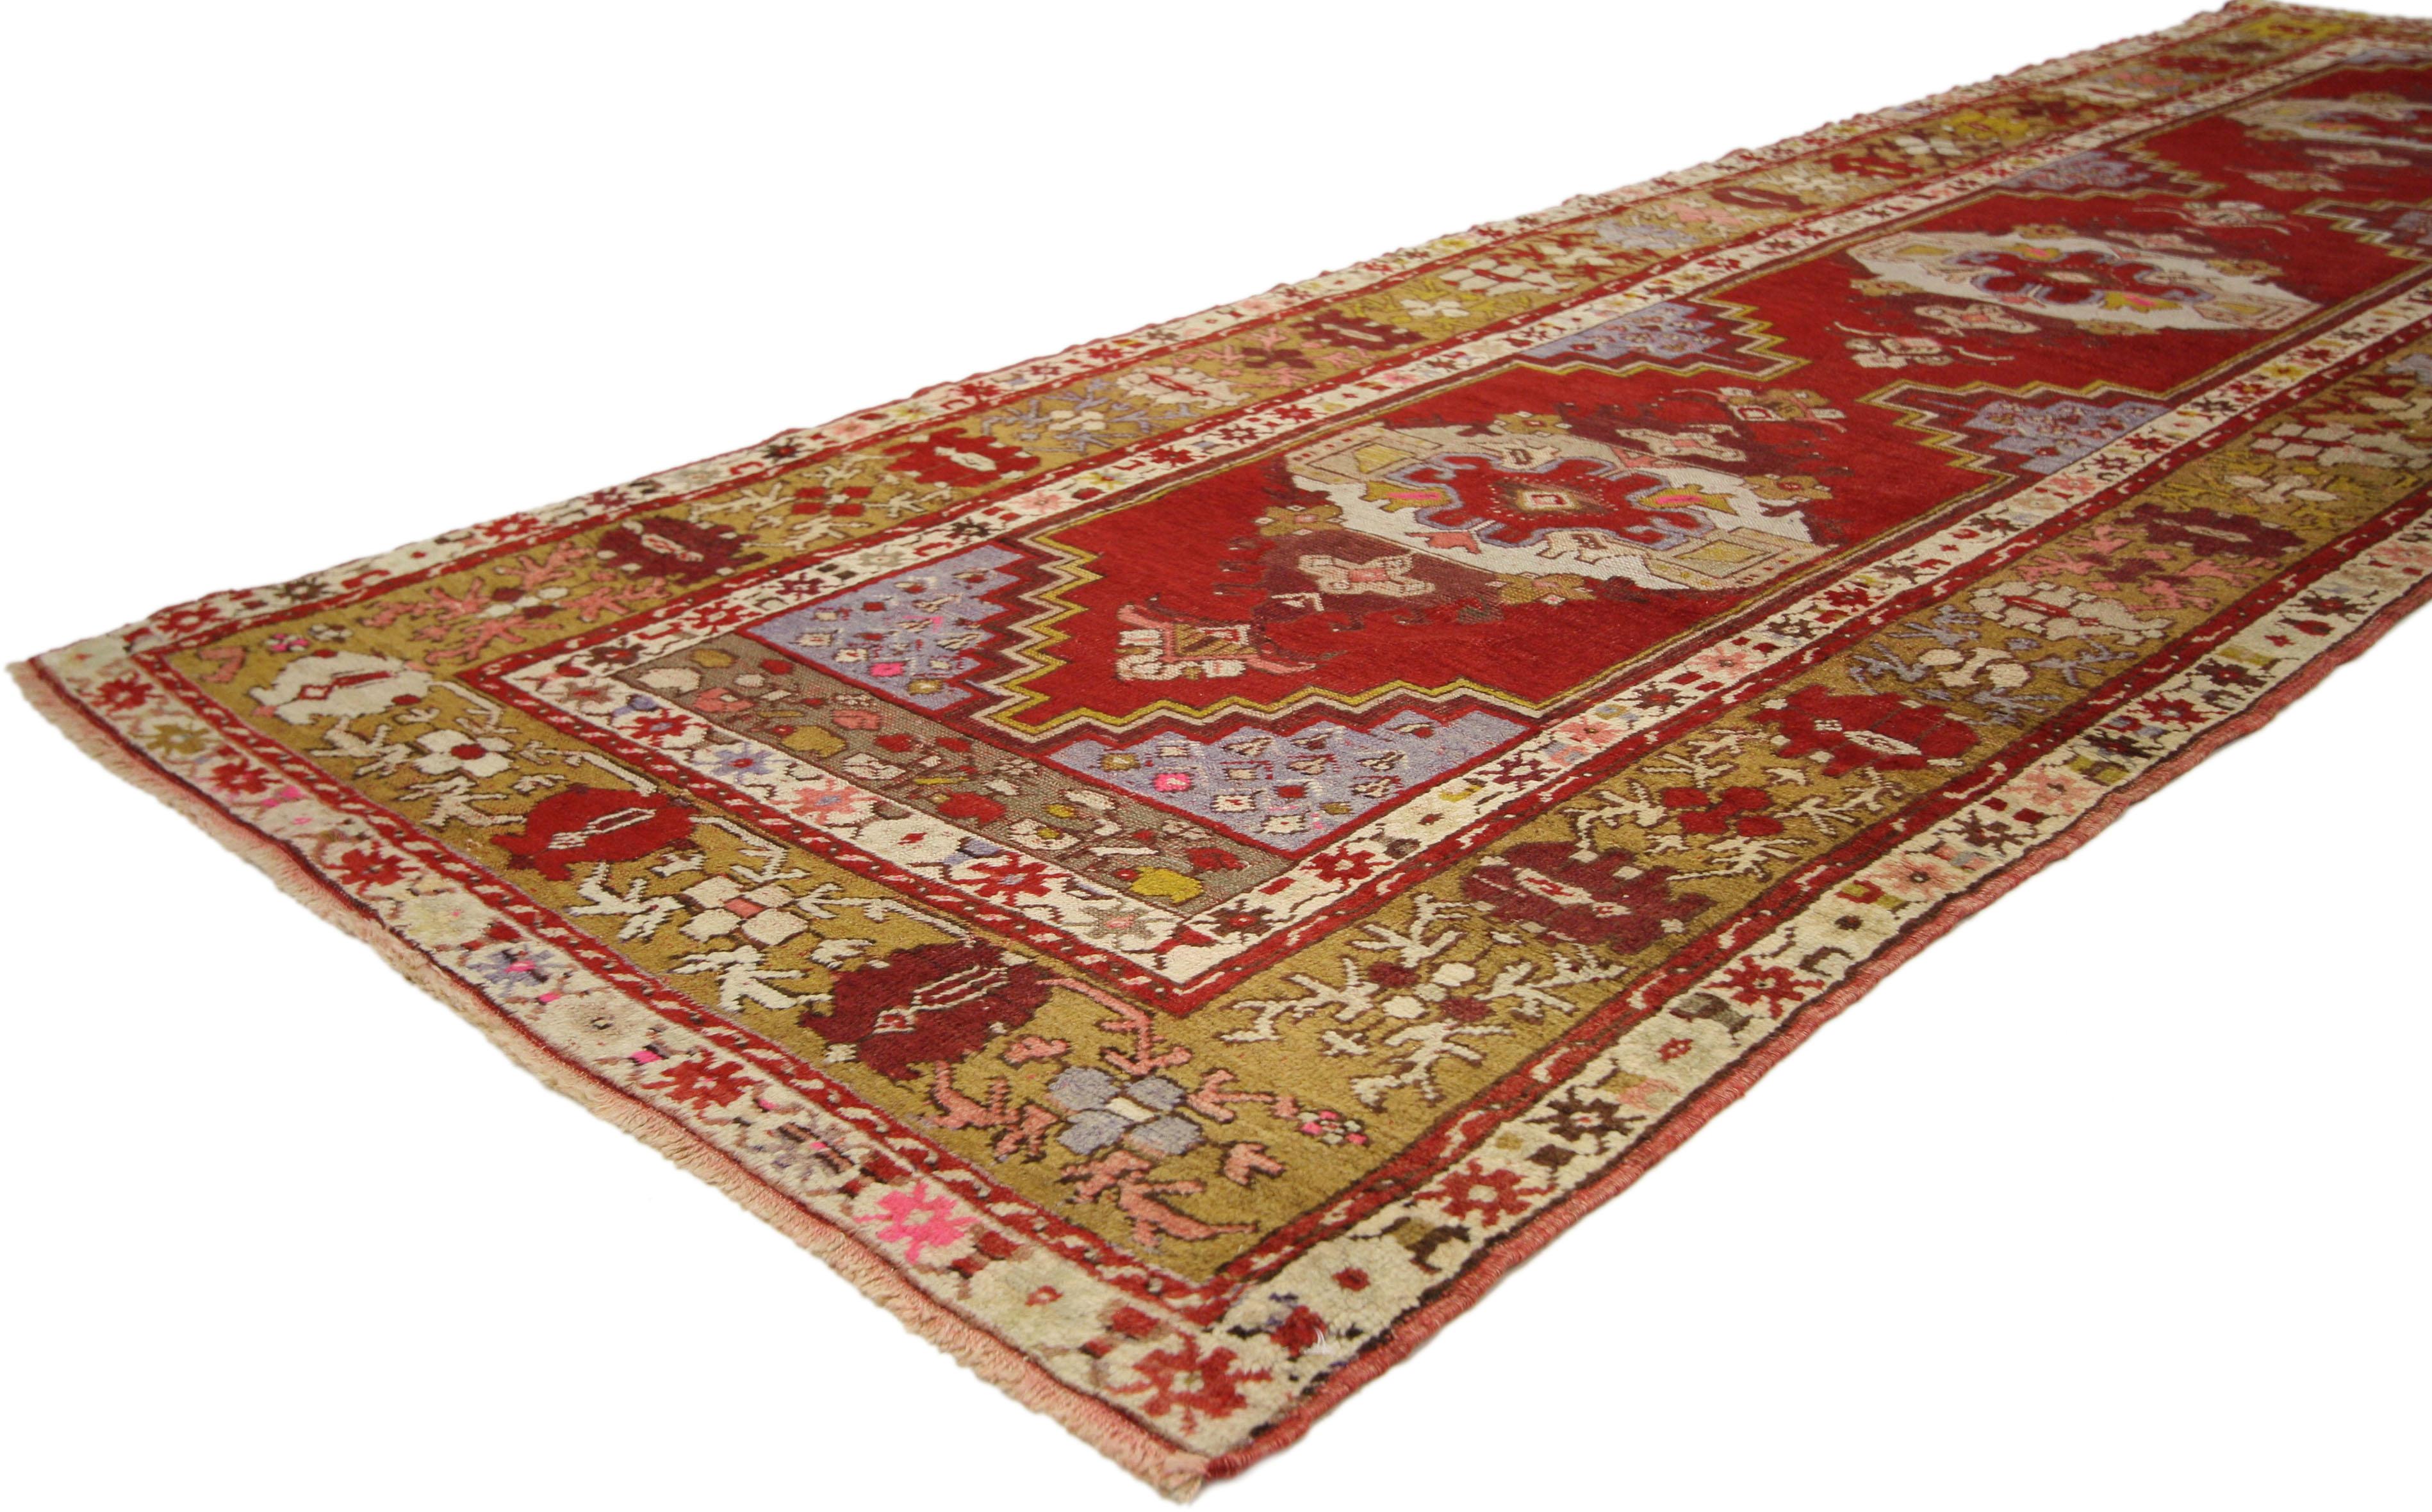 73852 Vintage Turkish Oushak runner with Modern Tribal style, Hallway runner. This vintage Turkish Oushak carpet runner features a triple medallion with cartouche finials in an open red field surrounded by a modern tribal style border. Rendered in a